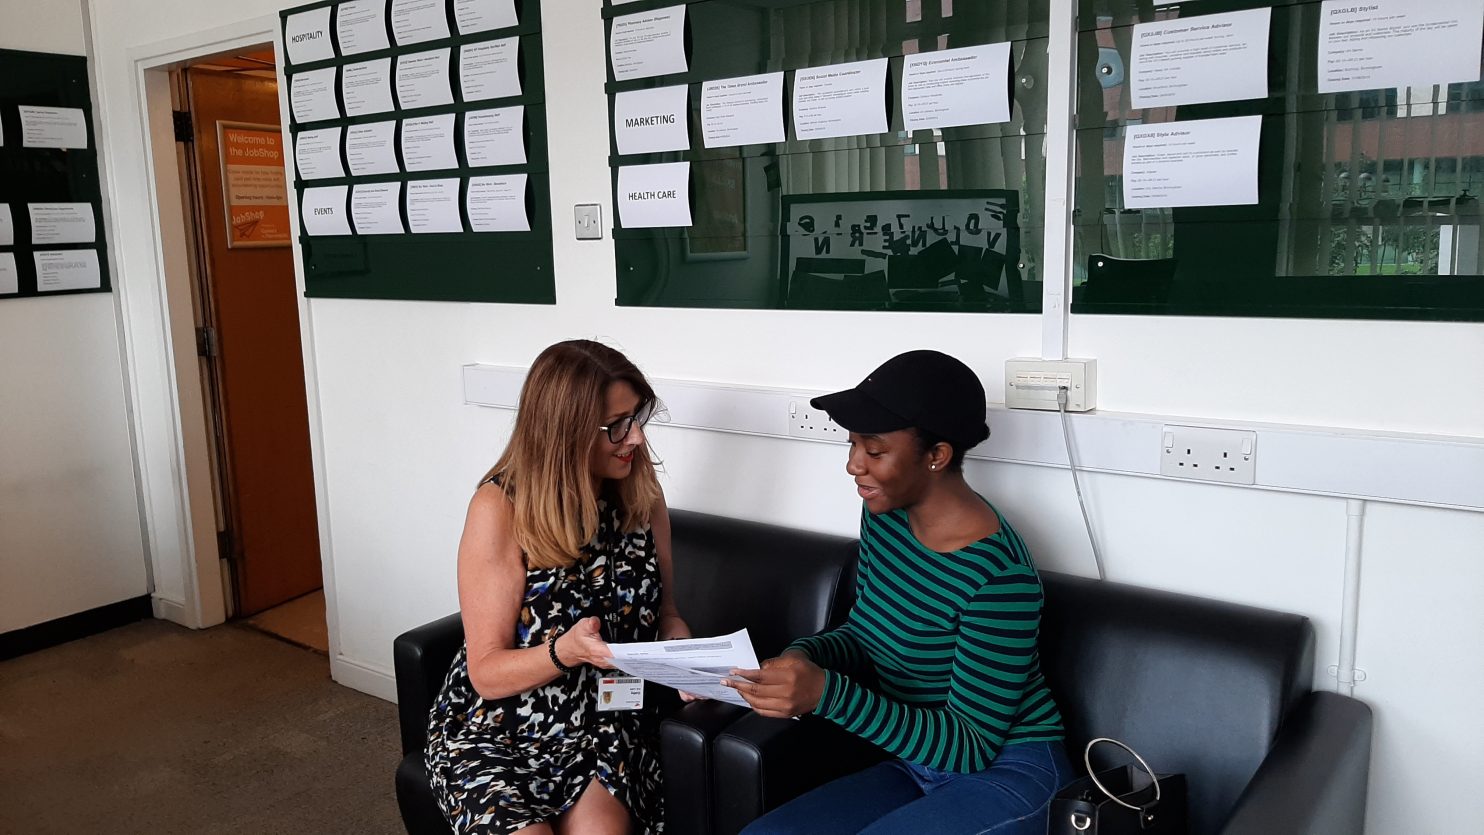 A student getting CV advice from Cathy, the JobShop manager